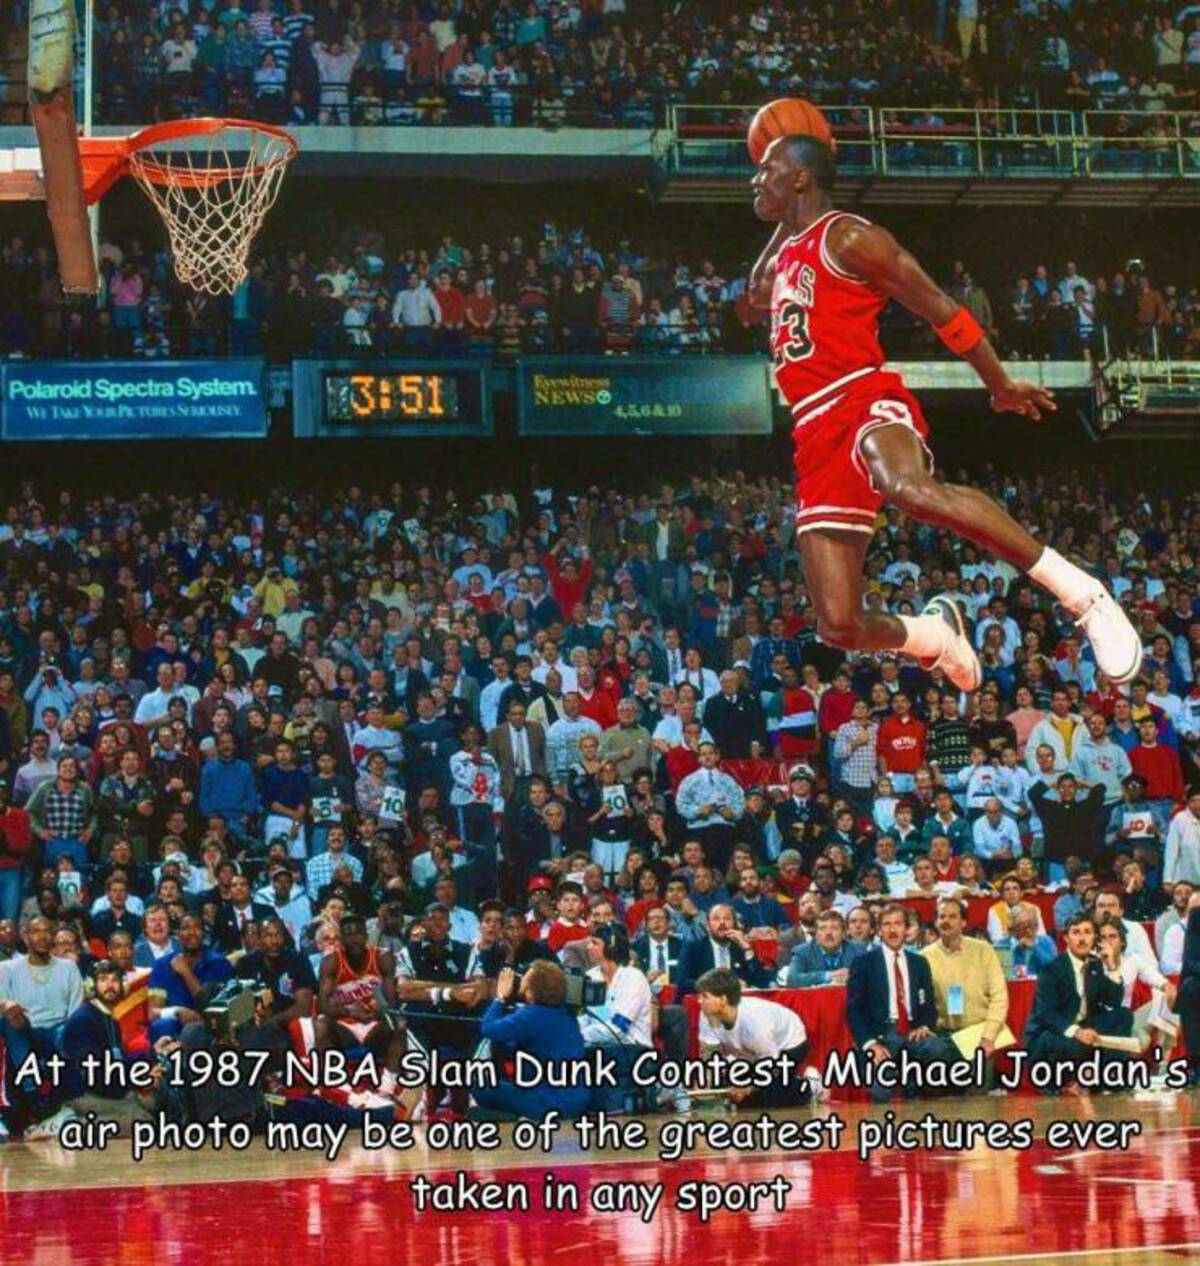 iconic basketball - Polaroid Spectra System Wetan Your Pictures Seriously Eyewitness Newso 446&D 10 At the 1987 Nba Slam Dunk Contest, Michael Jordan's air photo may be one of the greatest pictures ever taken in any sport